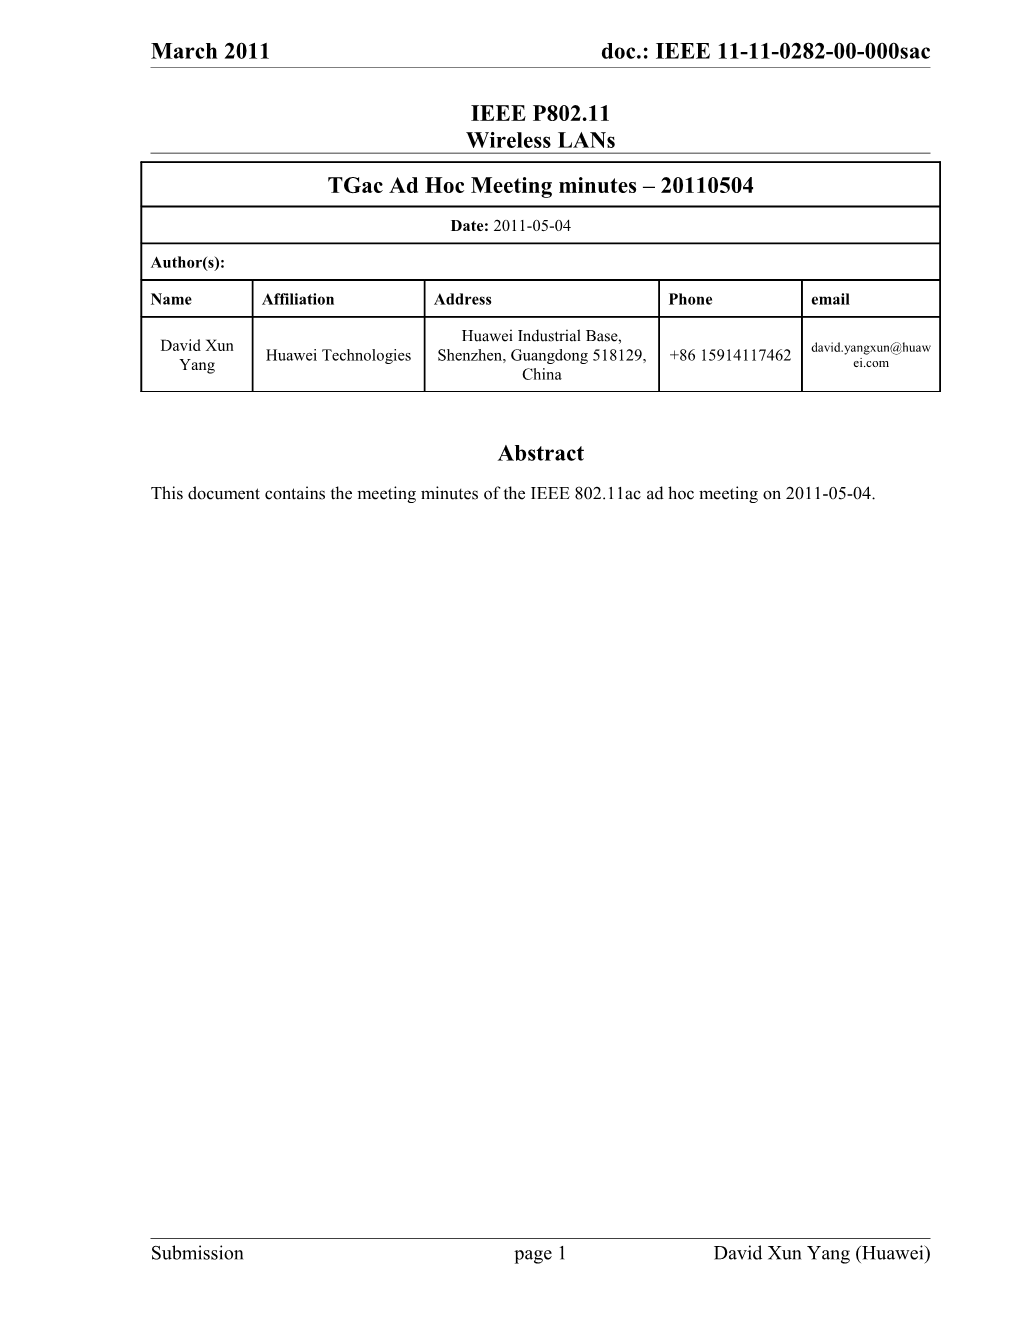 This Document Contains the Meeting Minutes of the IEEE 802.11Acad Hoc Meeting on 2011-05-04